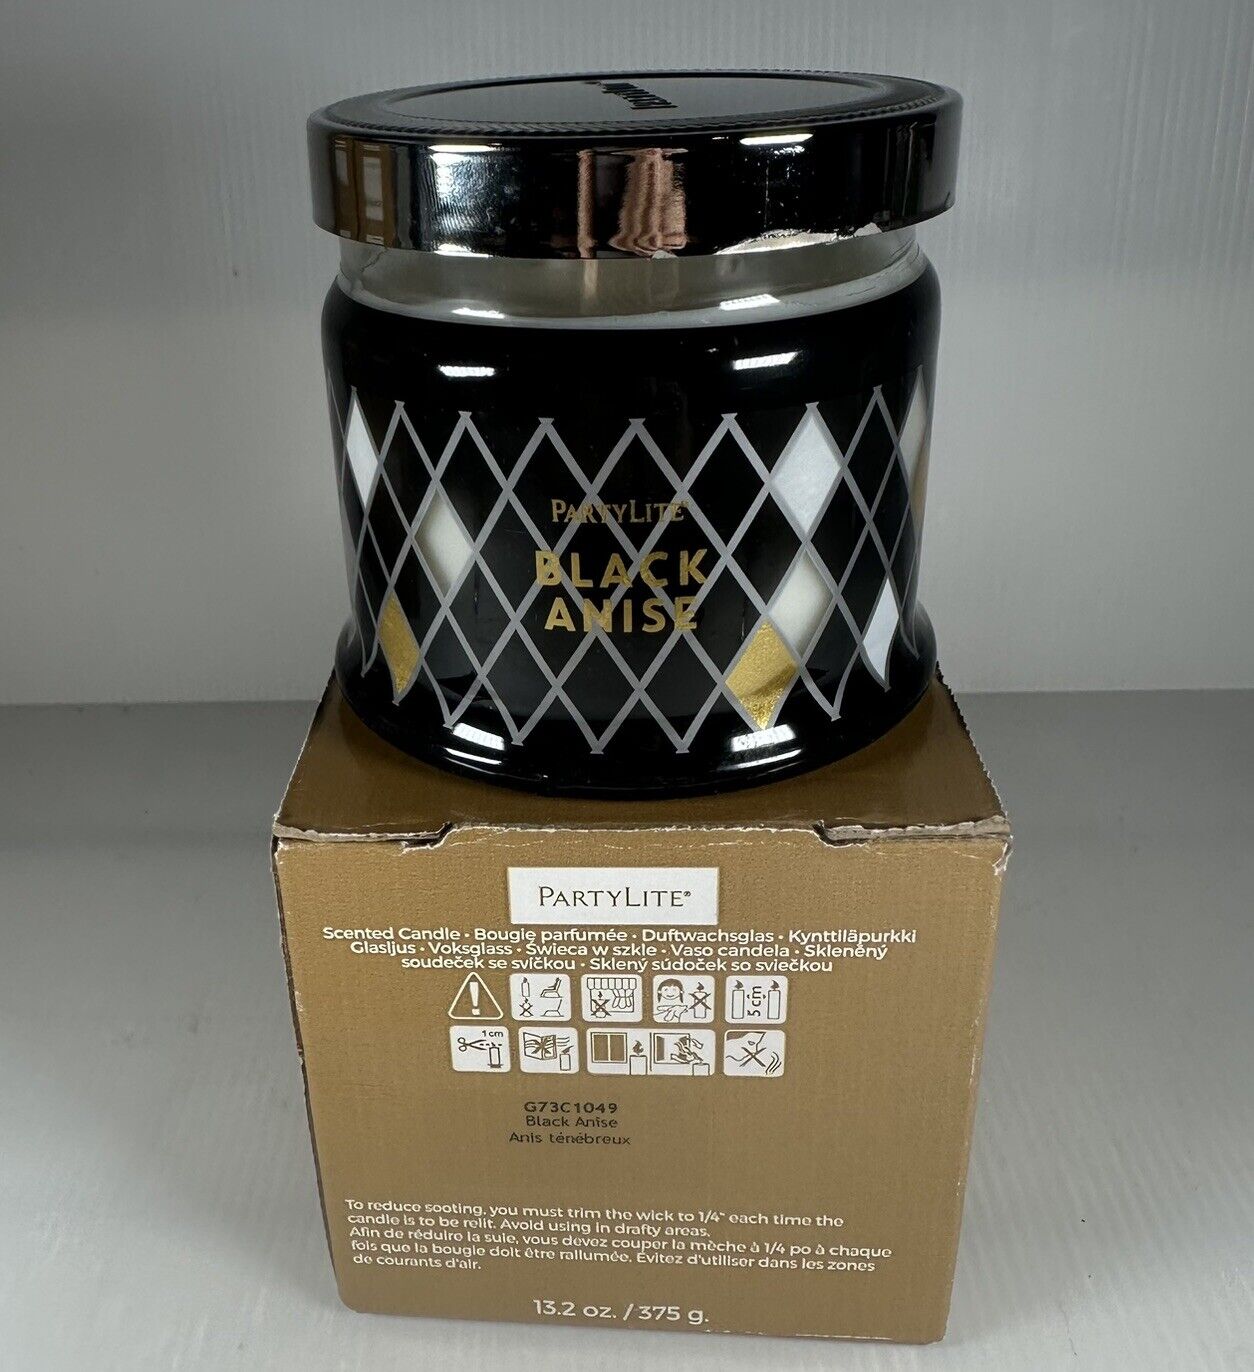 Partylite BLACK ANISE SIGNATURE 3-wick JAR CANDLE BRAND NEW - 13.2oz